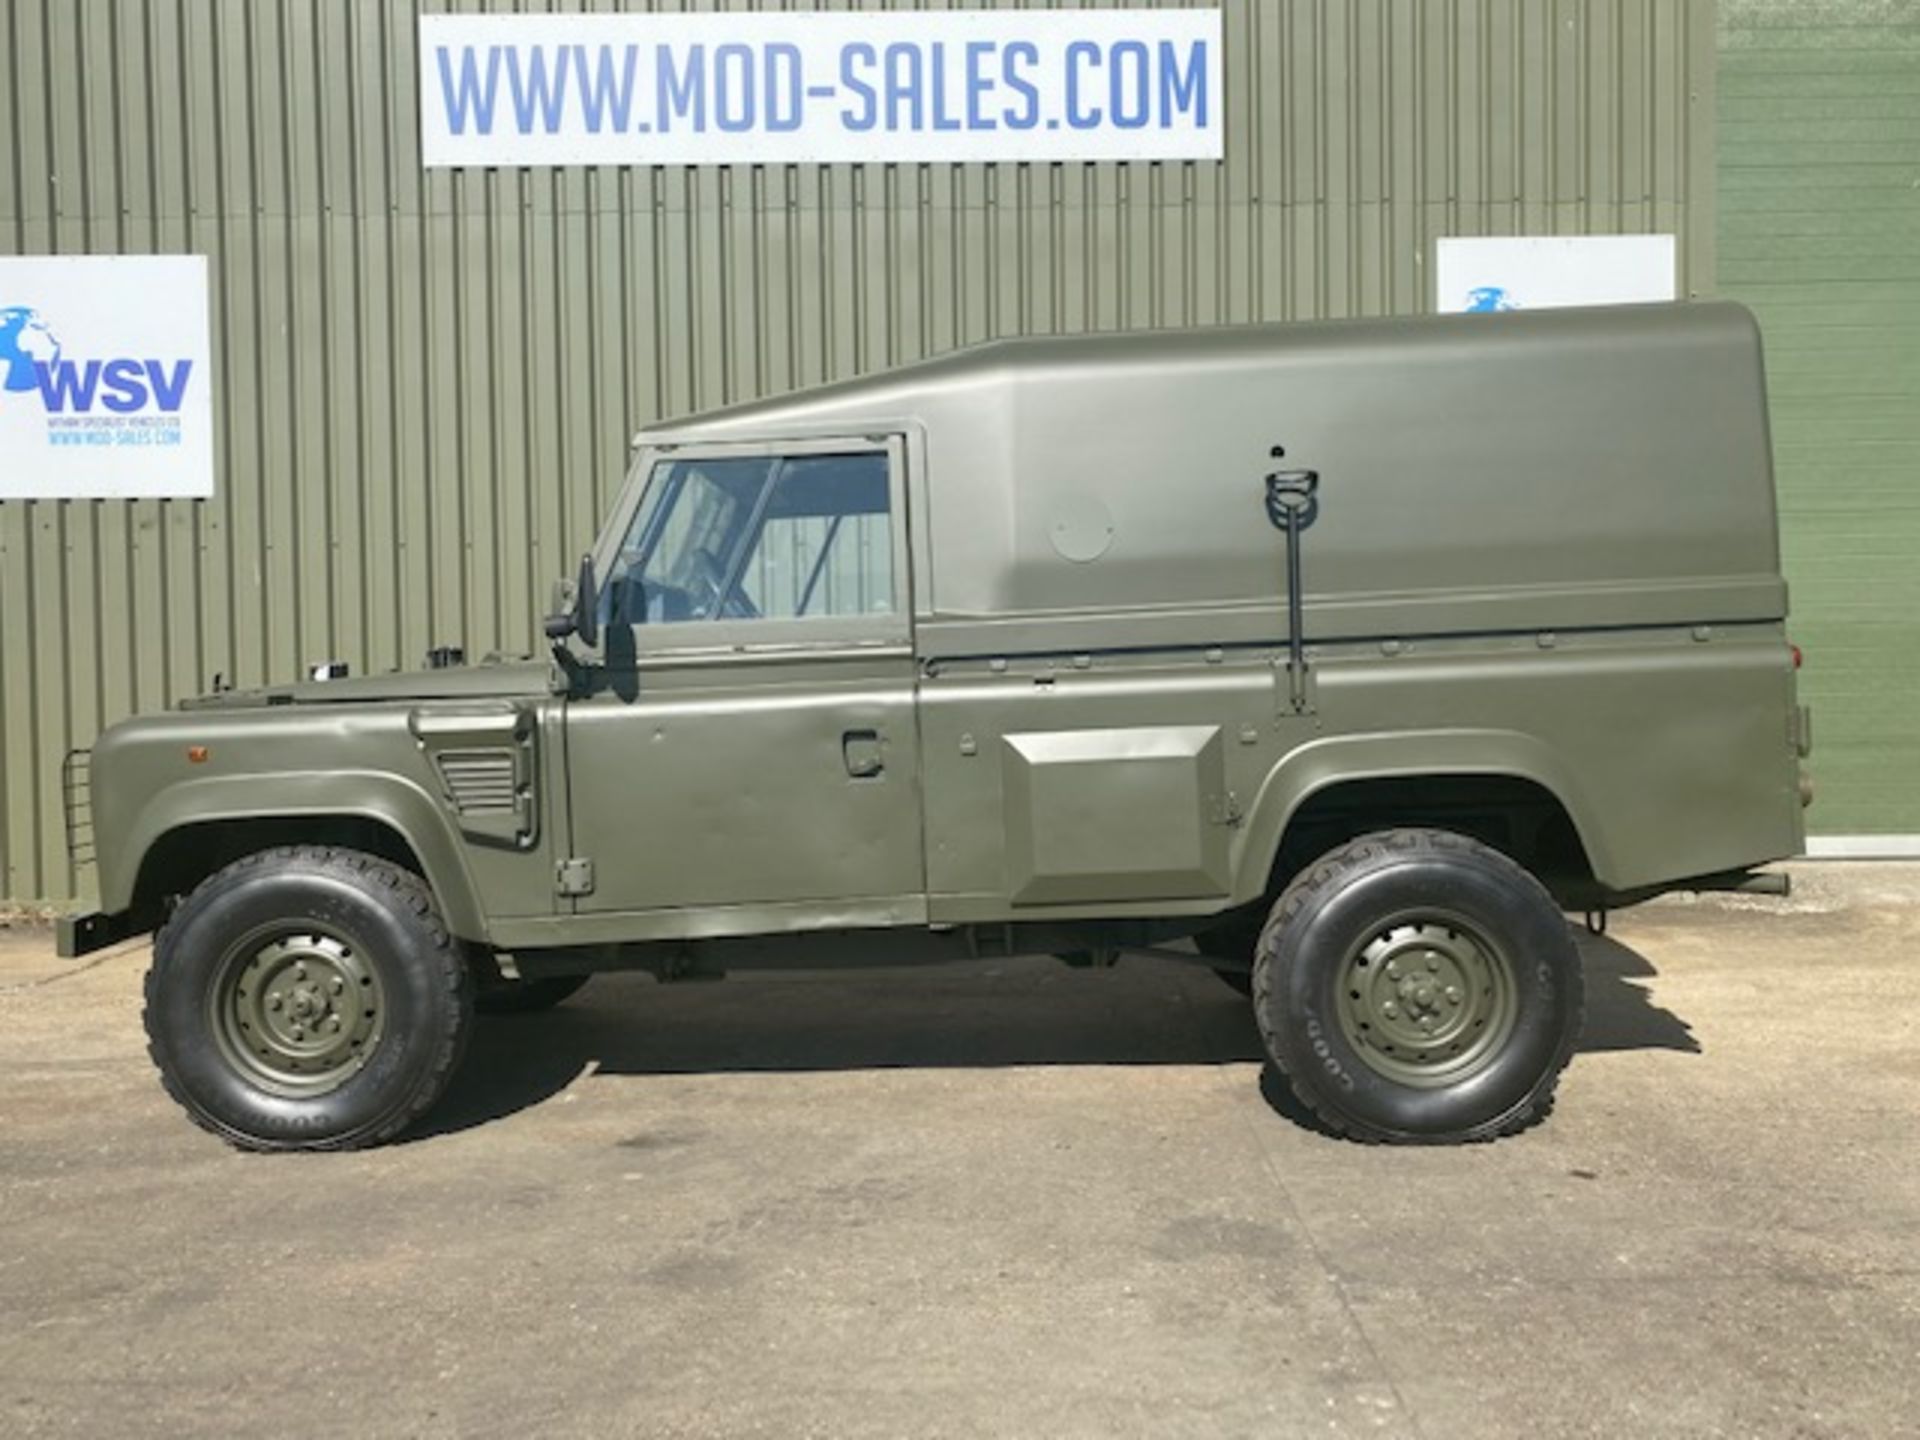 1997 Military Specification Left Hand Drive Land Rover Wolf 110 FFR Hard Top ONLY 172,783Km - Image 6 of 50